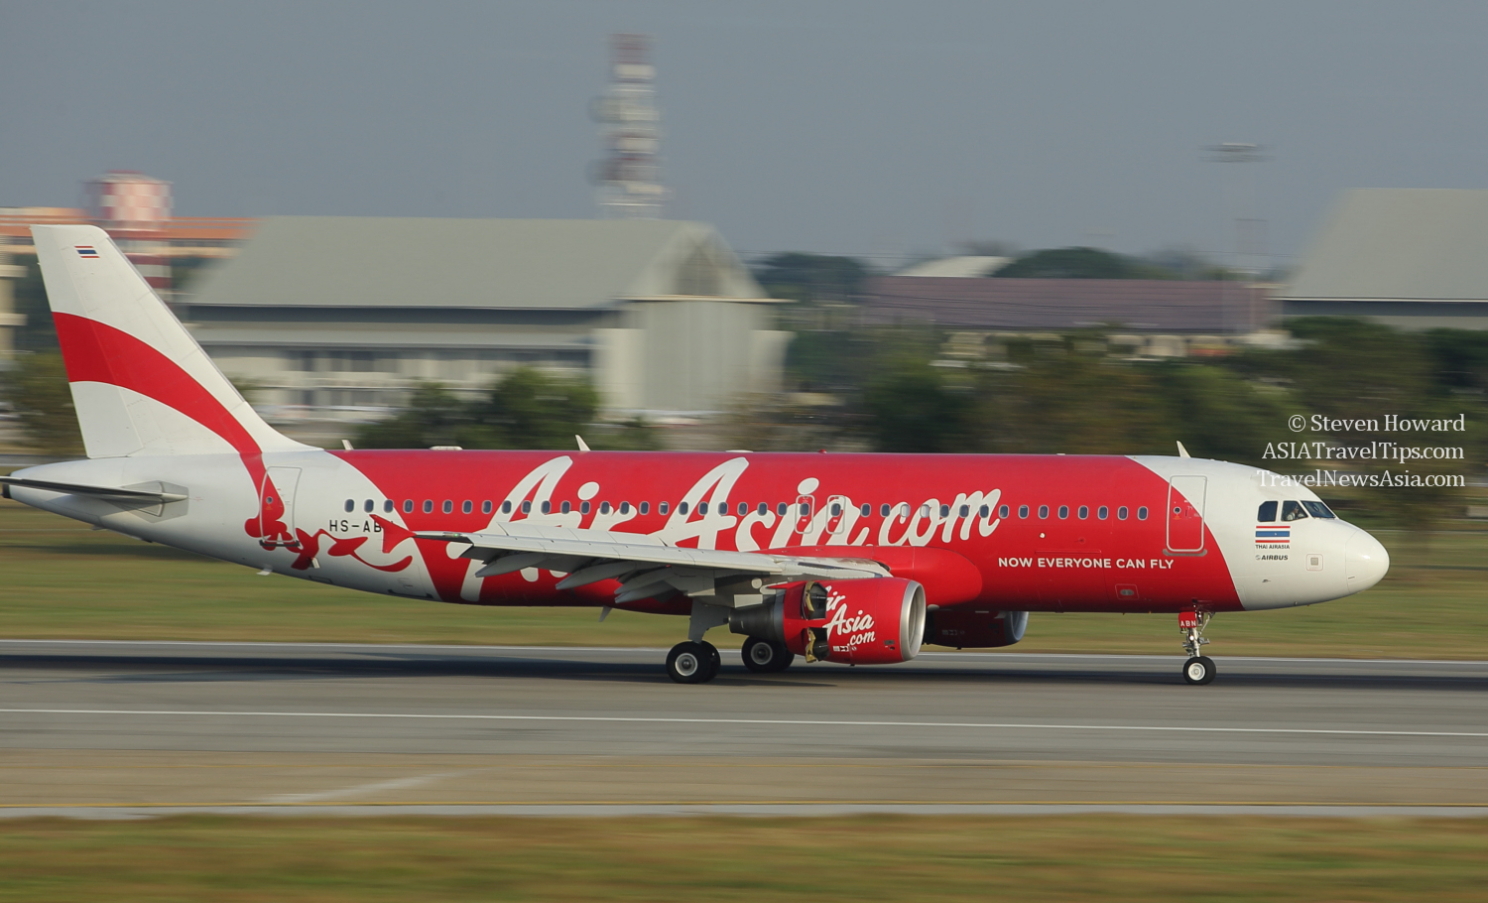 Thai AirAsia A320 at DMK. Picture by Steven Howard of TravelNewsAsia.com. Click to enlarge.